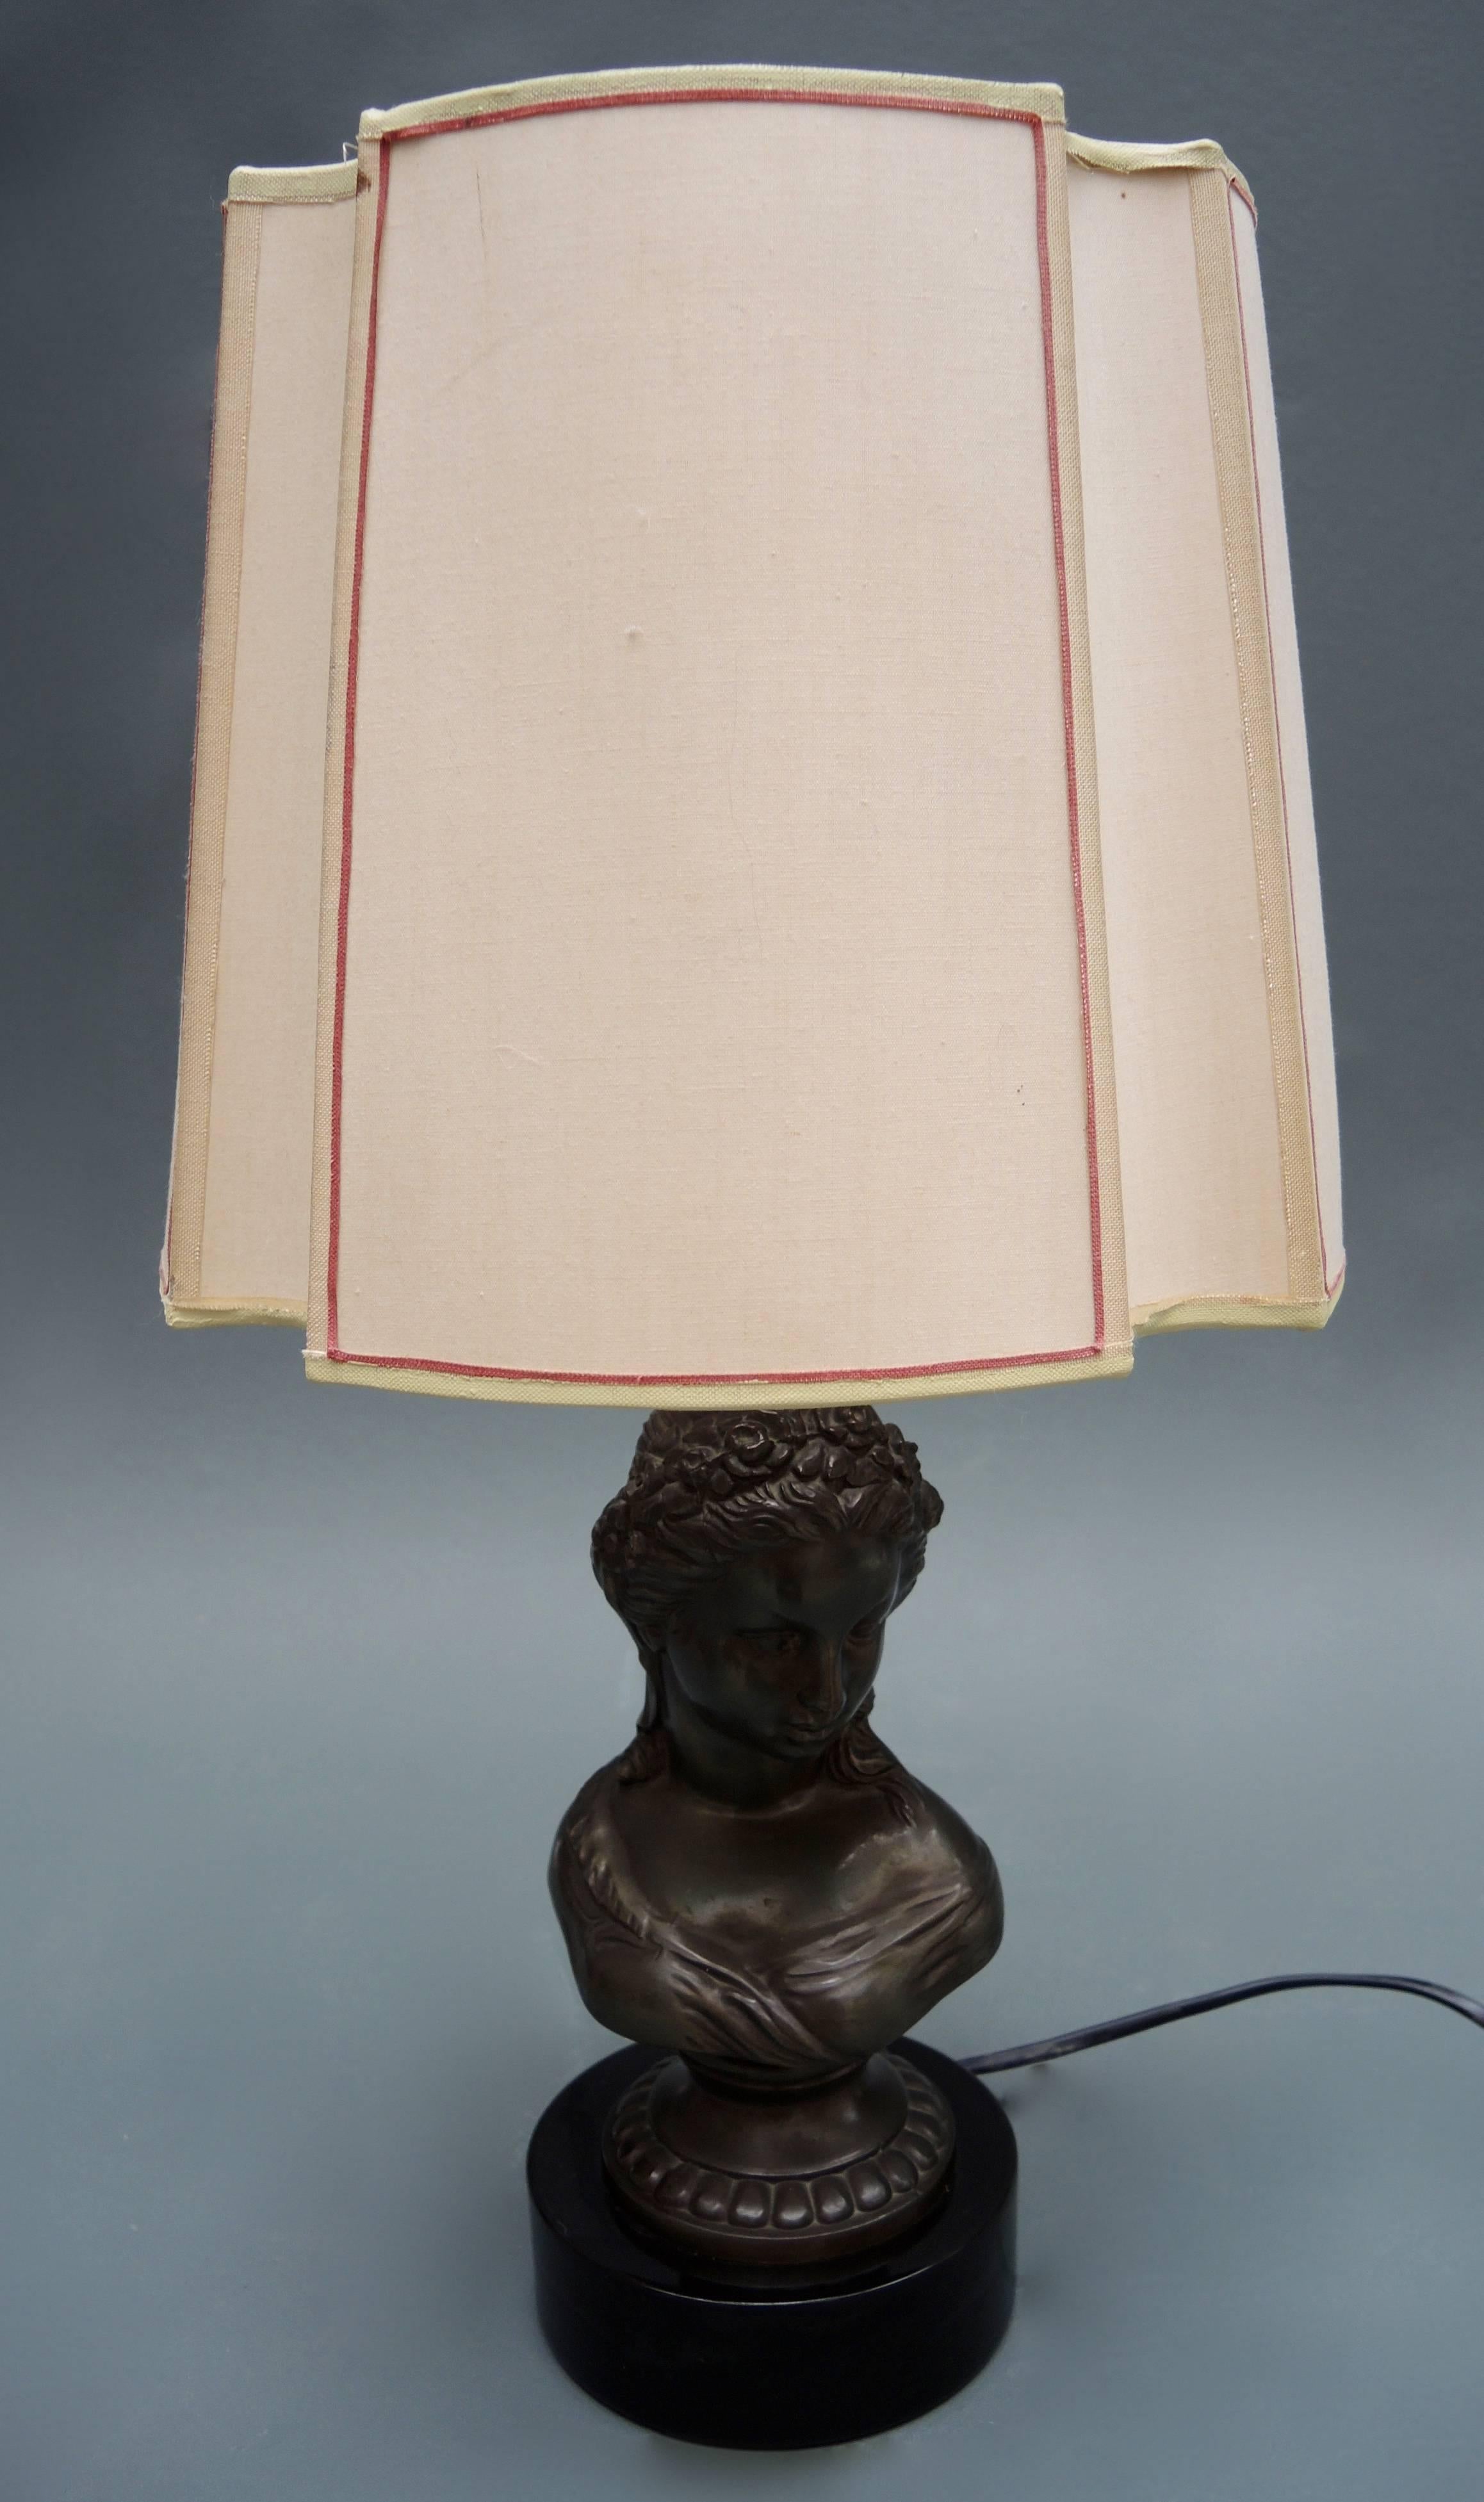 Lovely vintage table lamp cast metal bust of a young woman in the Louis XVI style mounted on a stone base. The lamp dates to the mid-20th century and includes the original unusually shaped handmade shade.
 